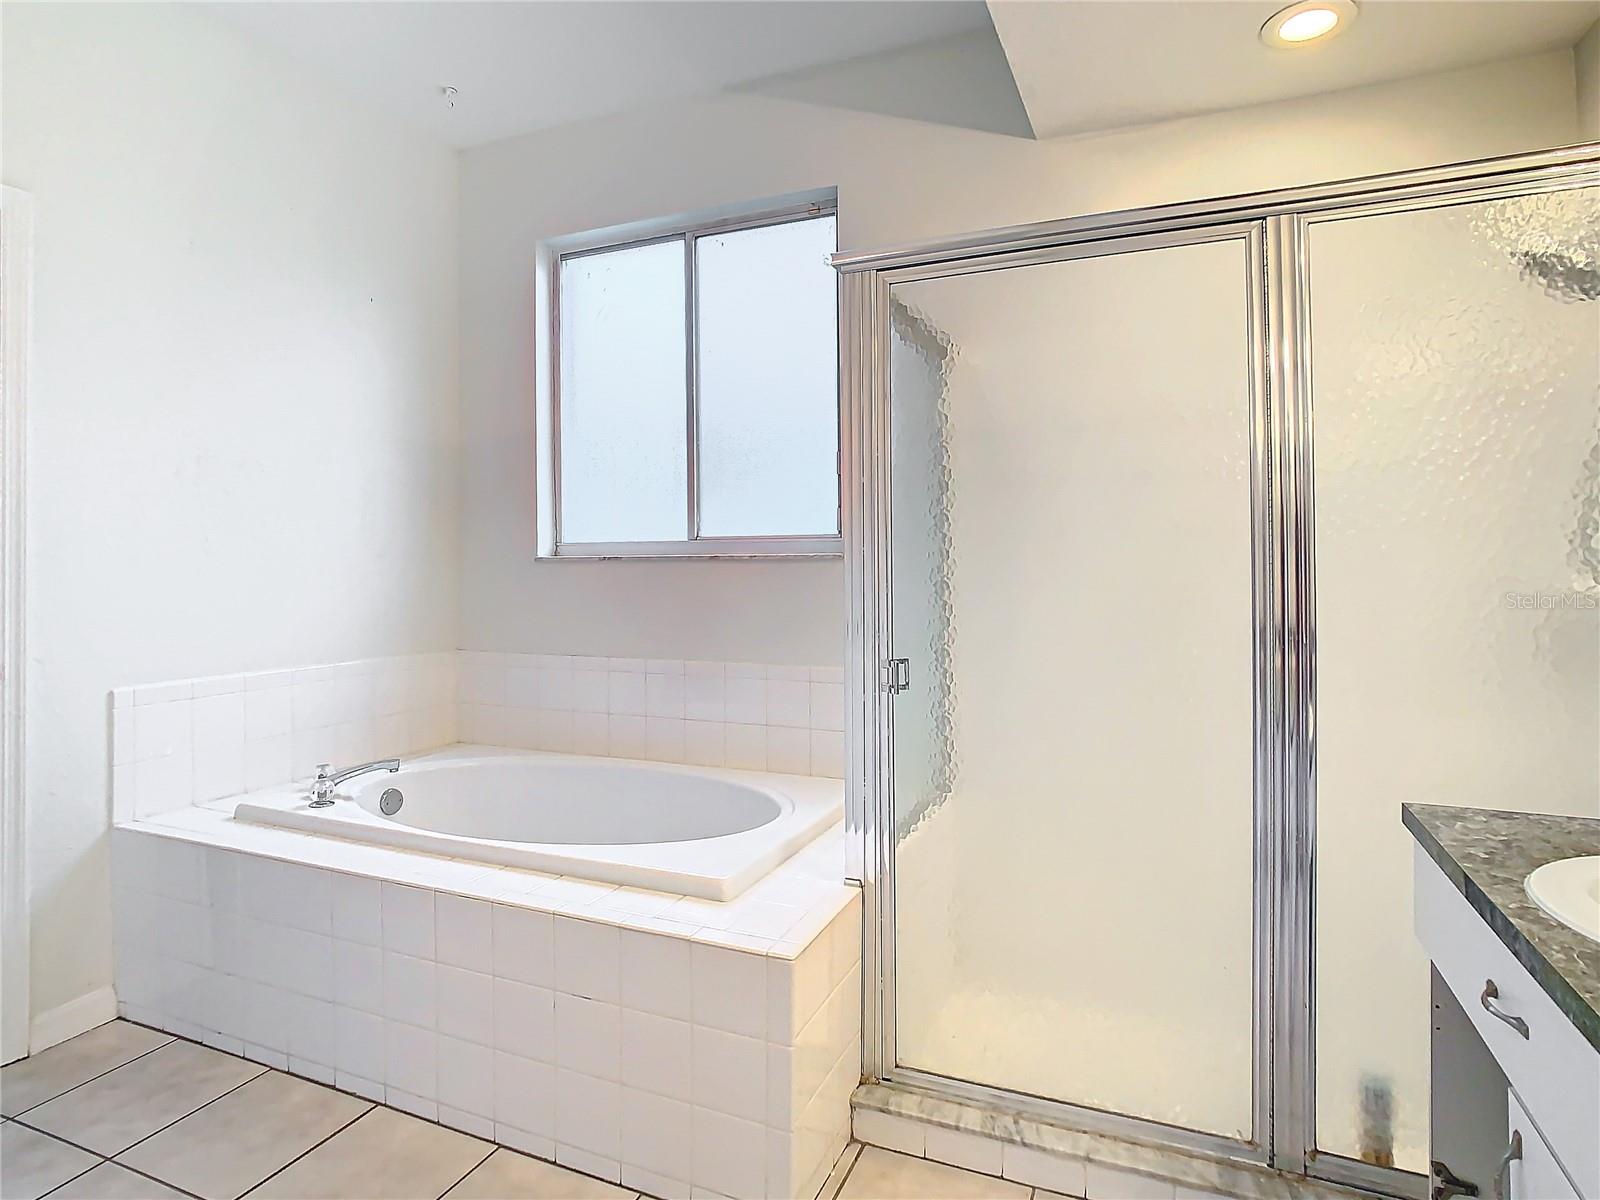 Owner's ensuite bath with garden tub and separate shower